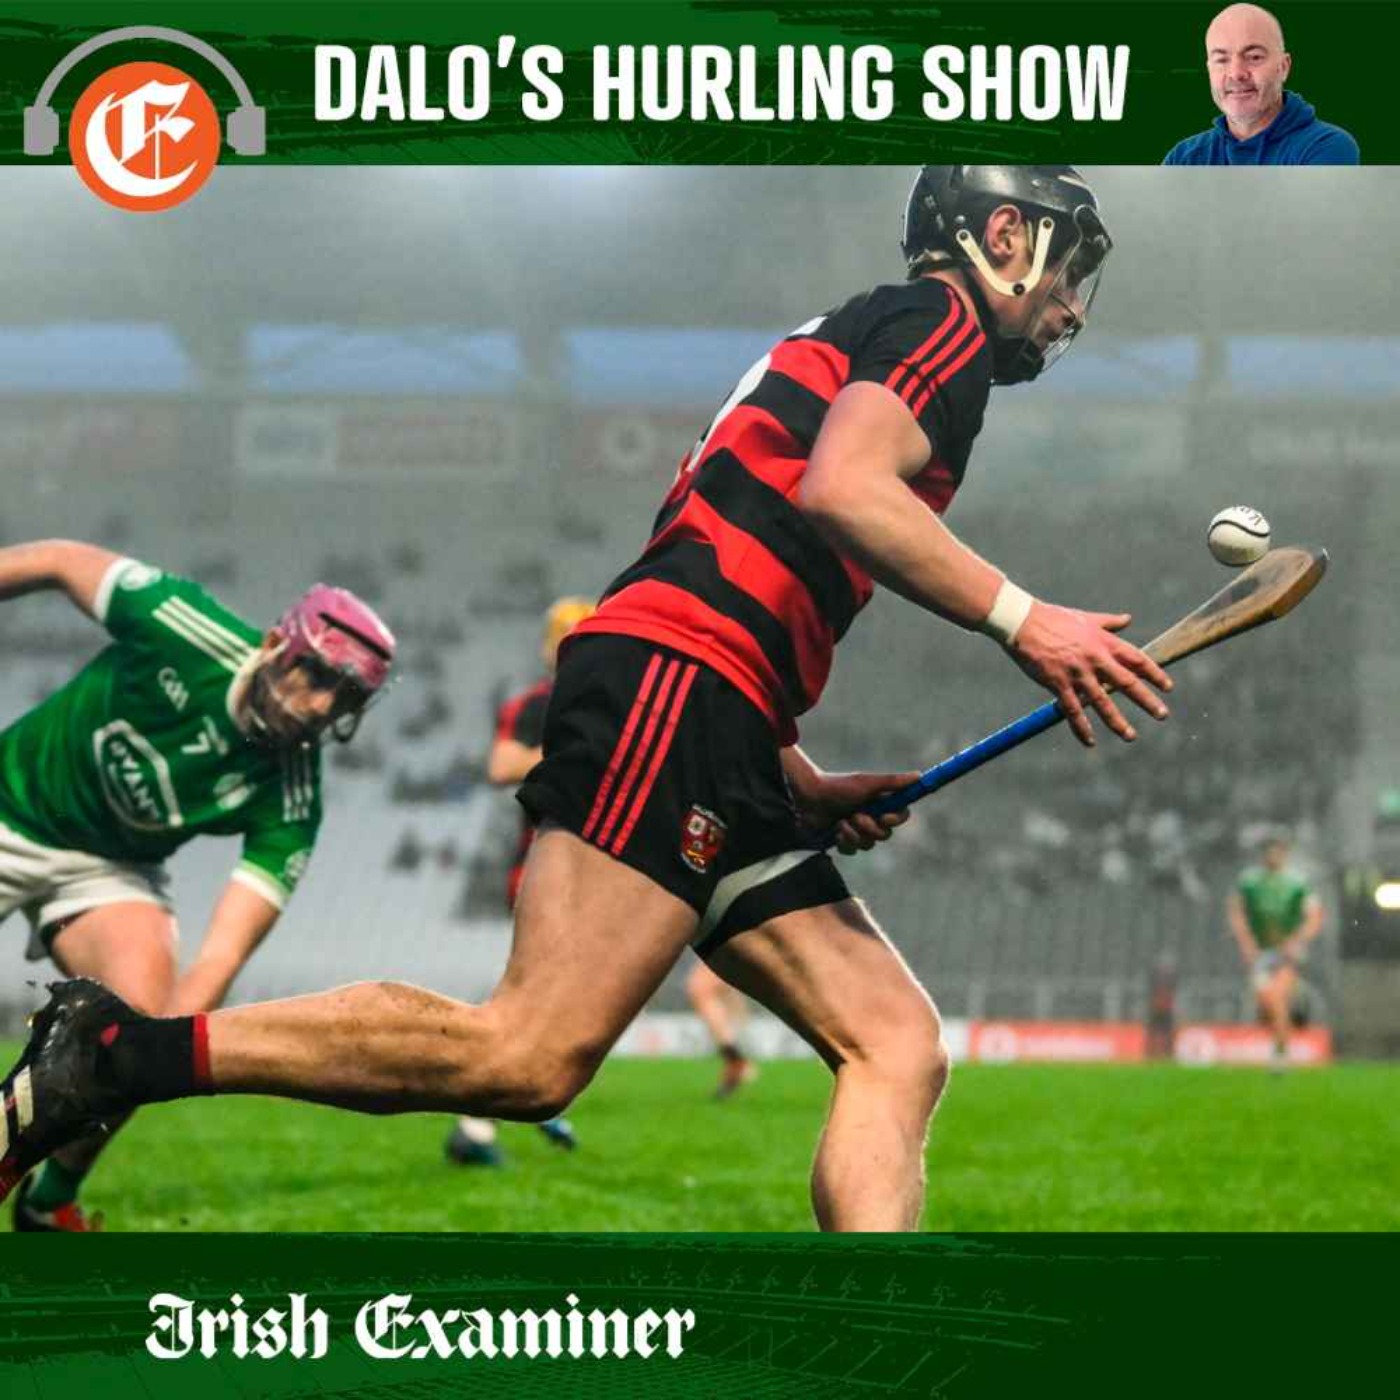 Dalo's Hurling Show: Ballygunner's edge, Kerry’s golden weekend, plus who's the game’s next Einstein?